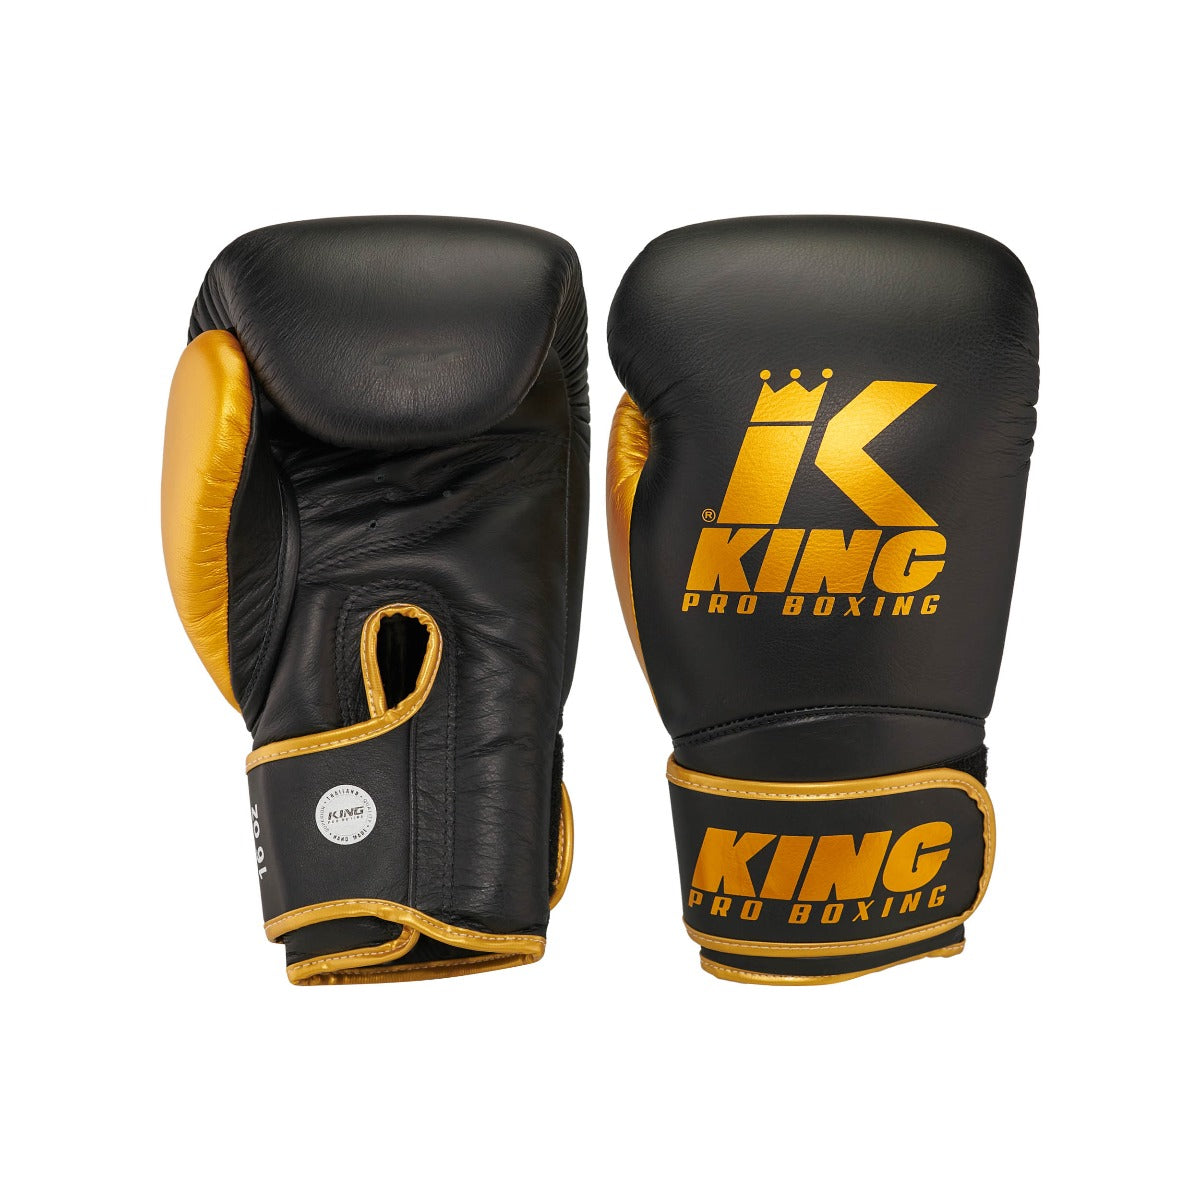 King PRO boxing boxing gloves - STAR 16